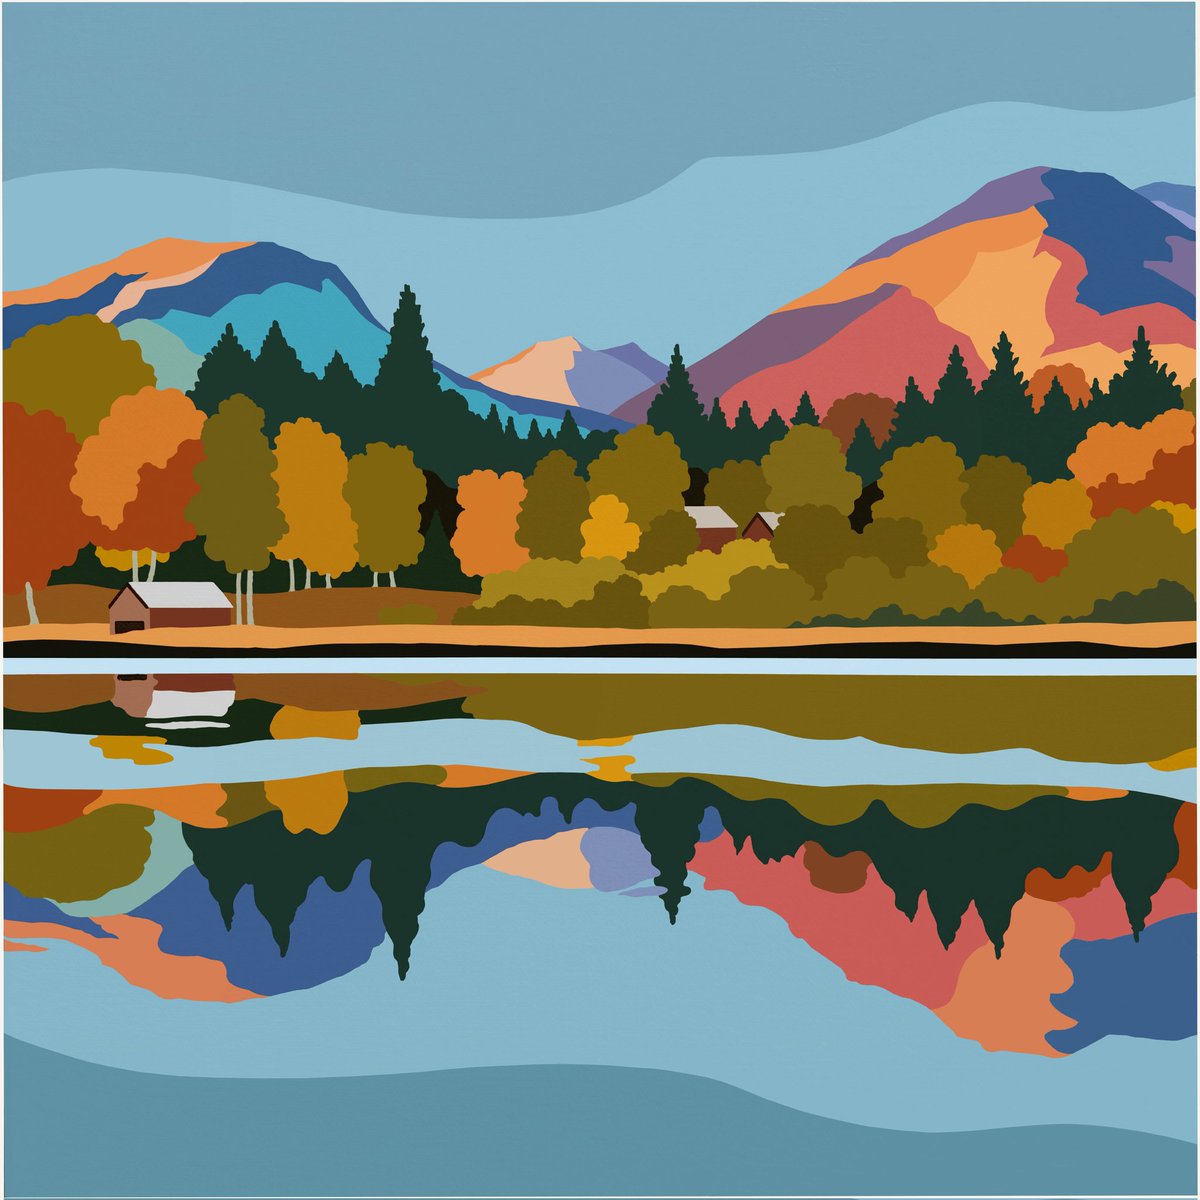 Derwentwater 
My latest #painting is now available as prints
#Keswick #Cumbria #lakedistrictart  slscott.co.uk/shop